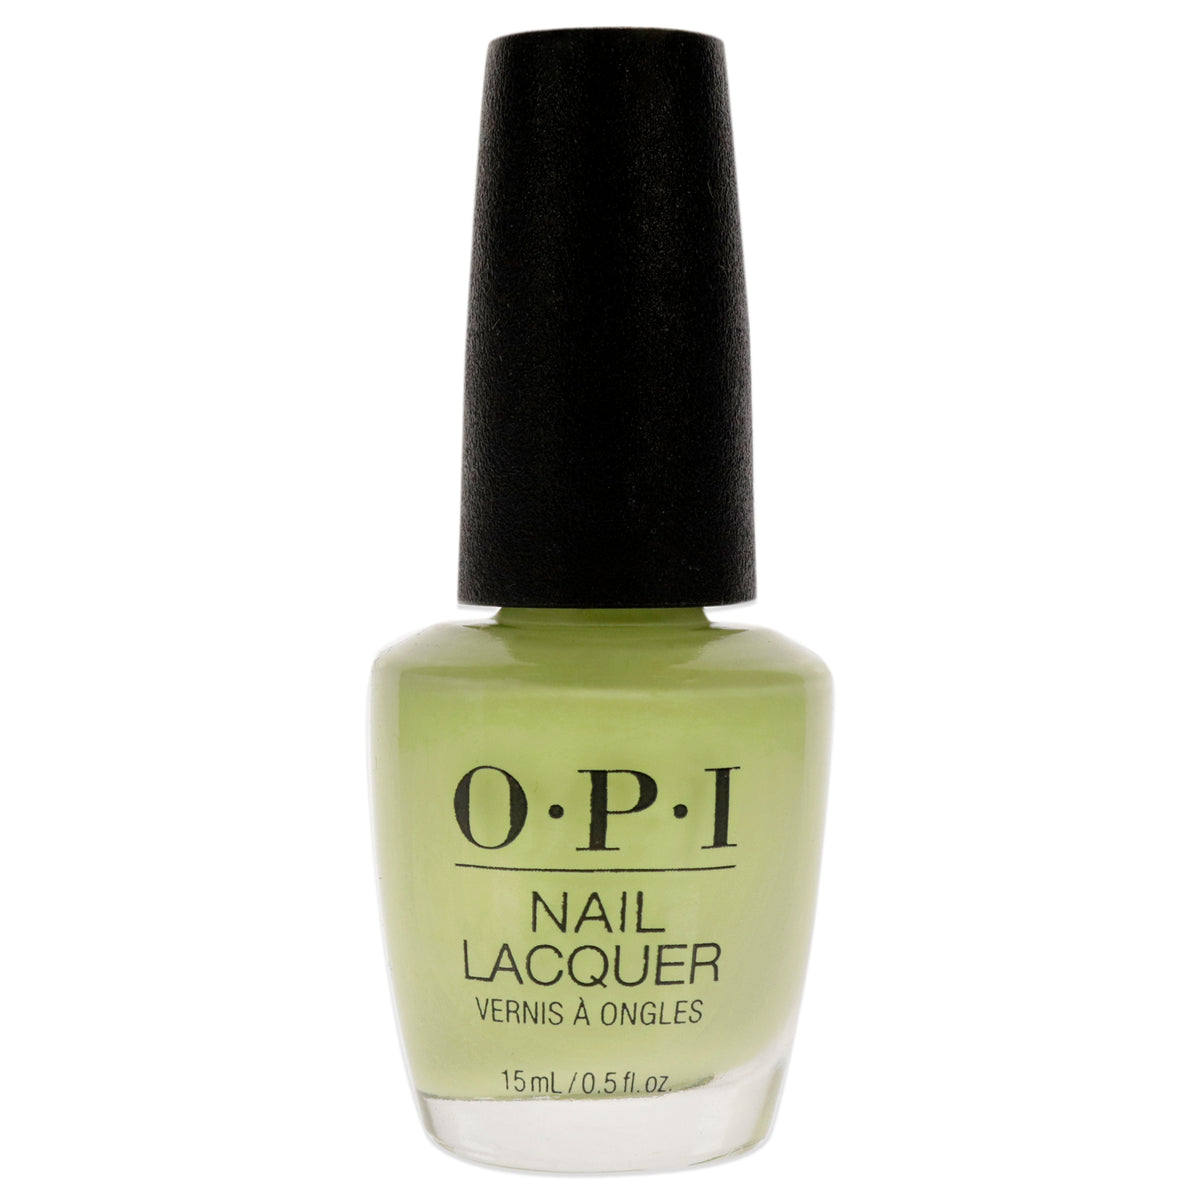 Nail Lacquer - NL N70 Pump Up the Volume by OPI for Women - 0.5 oz Nail Polish